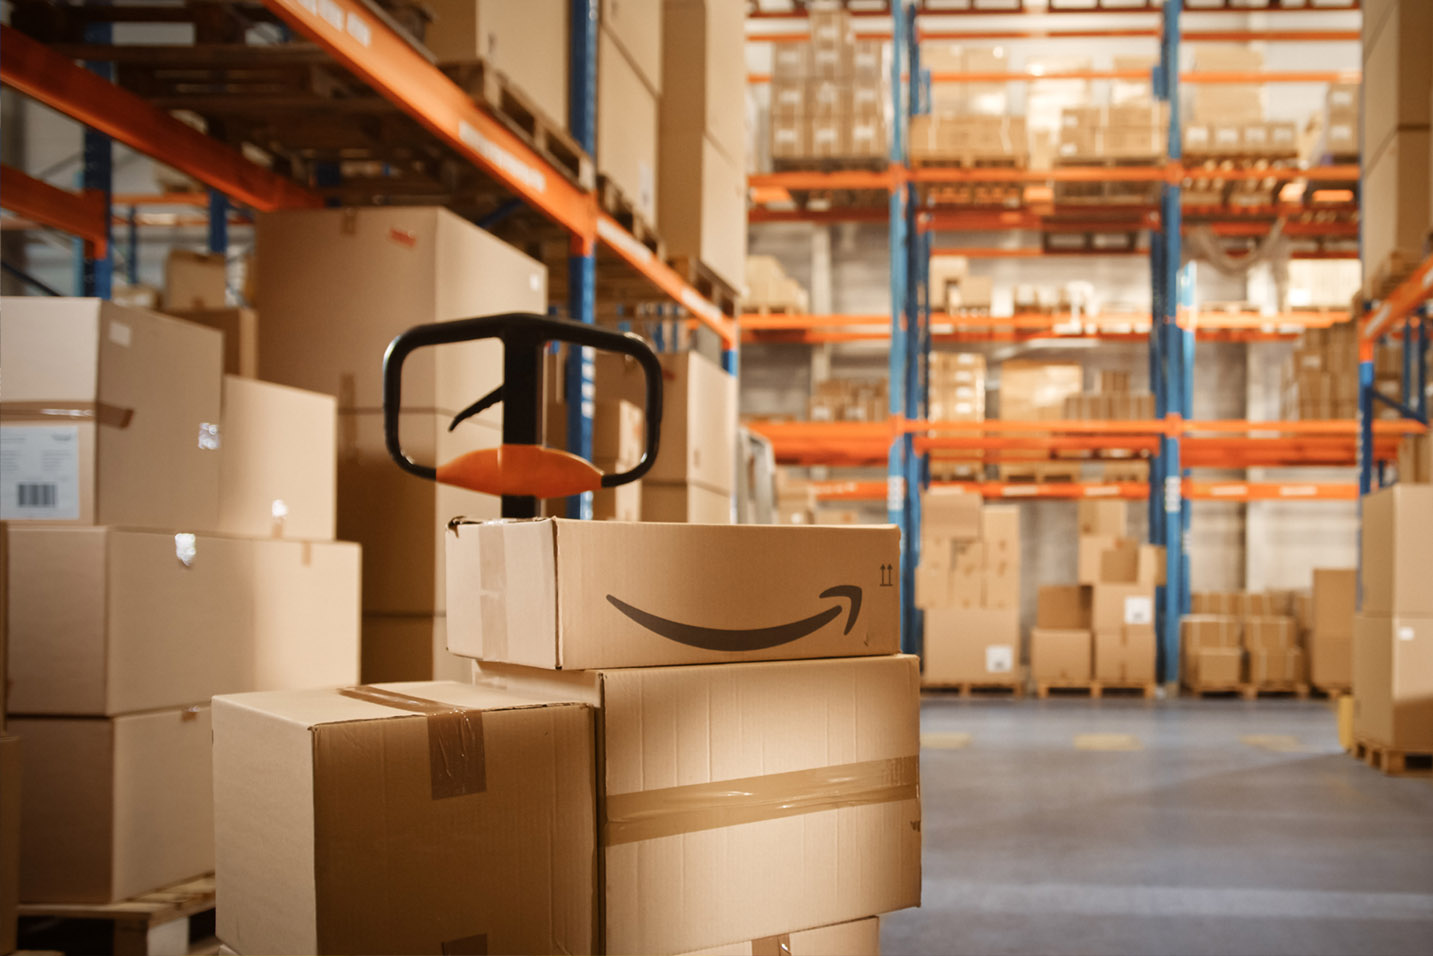 Amazon 2019 FBA Fee (Fulfillment by Amazon), Referral Fee and Storage Fee Changes 2019